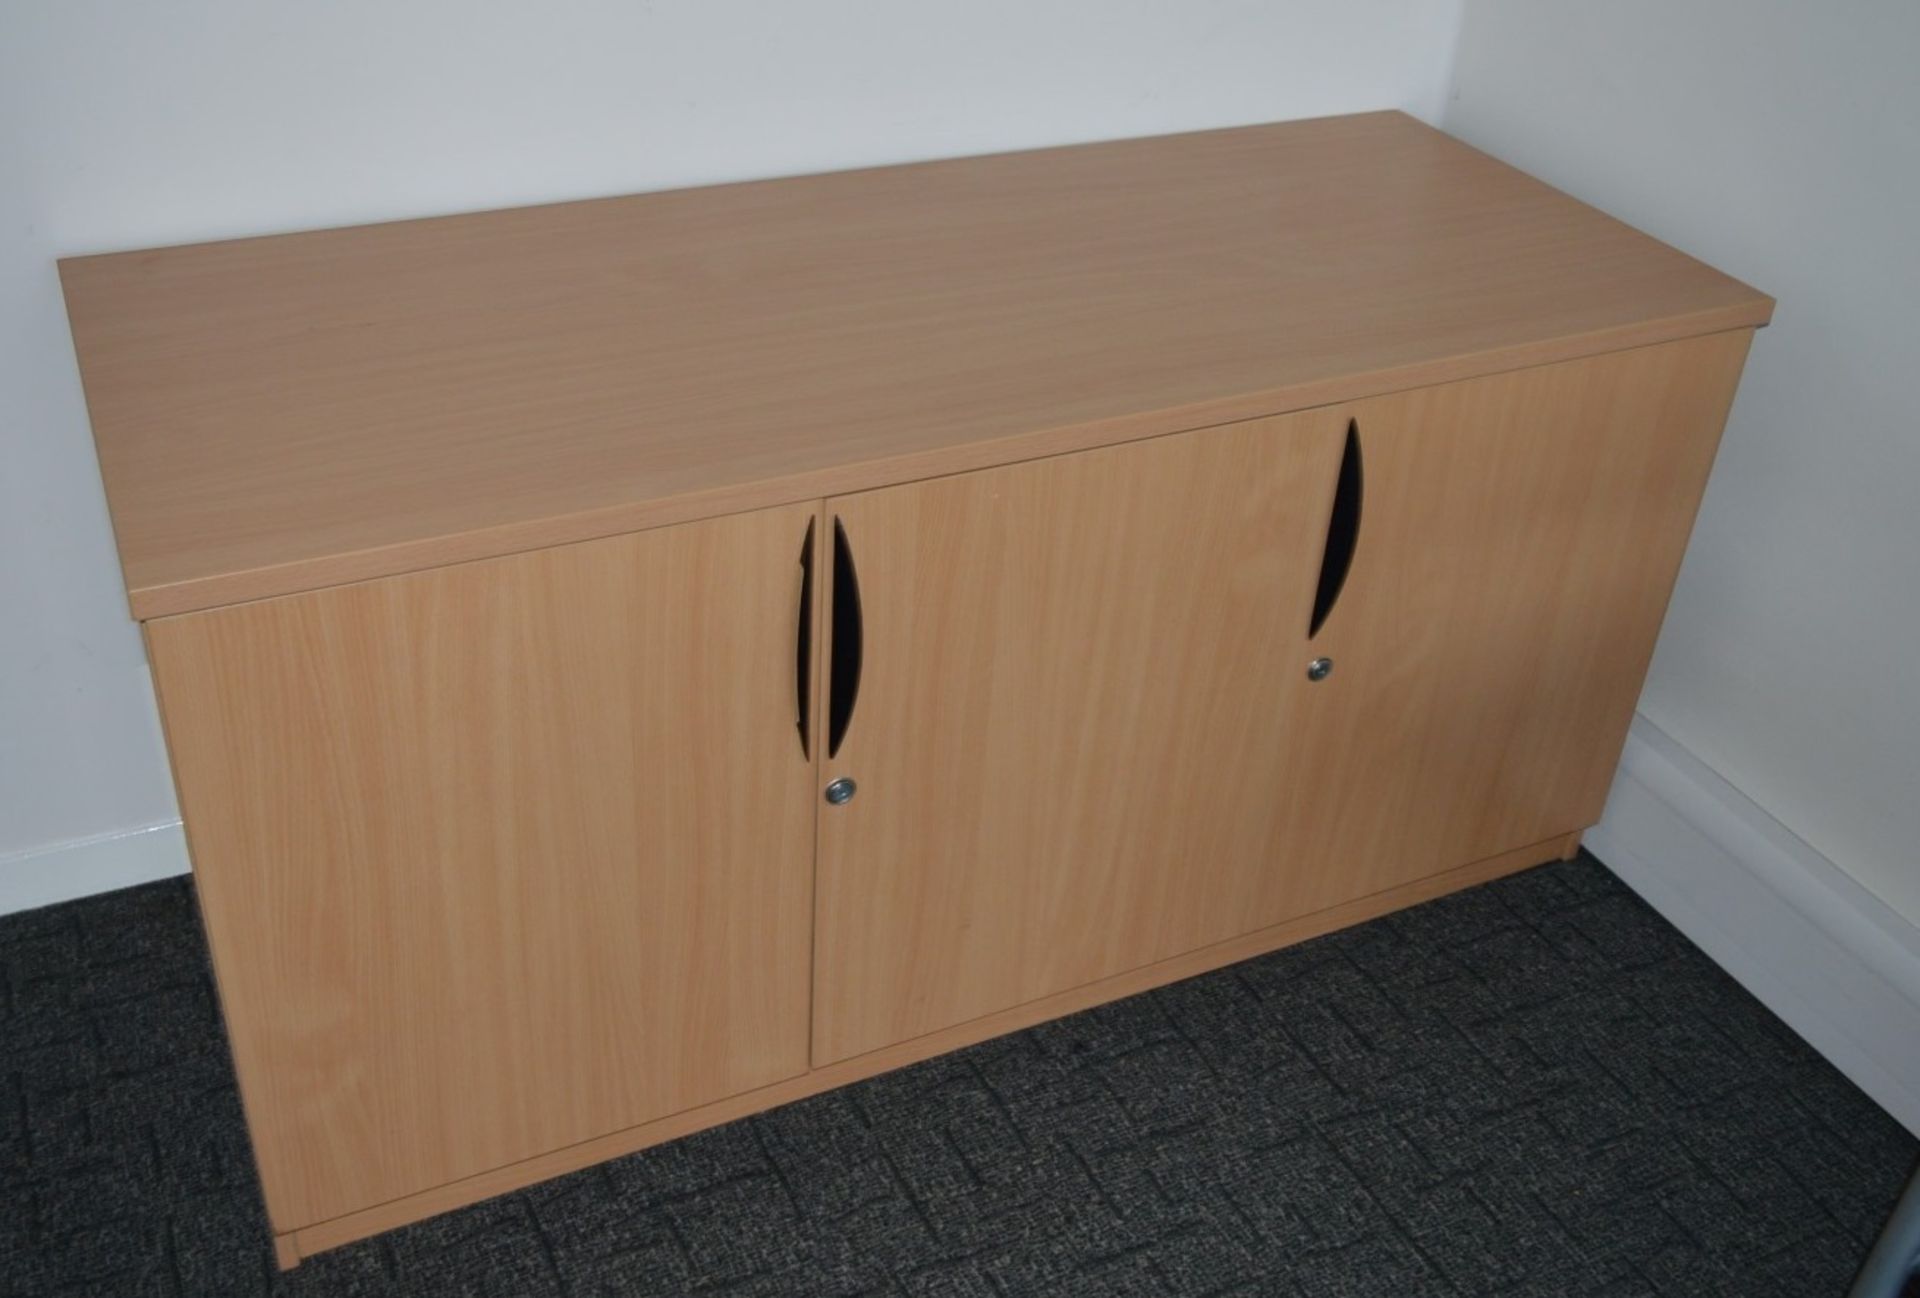 1 x Contemporary Three Door Office Cabinet With Beech Finish - CL011 - Location: Altrincham WA14